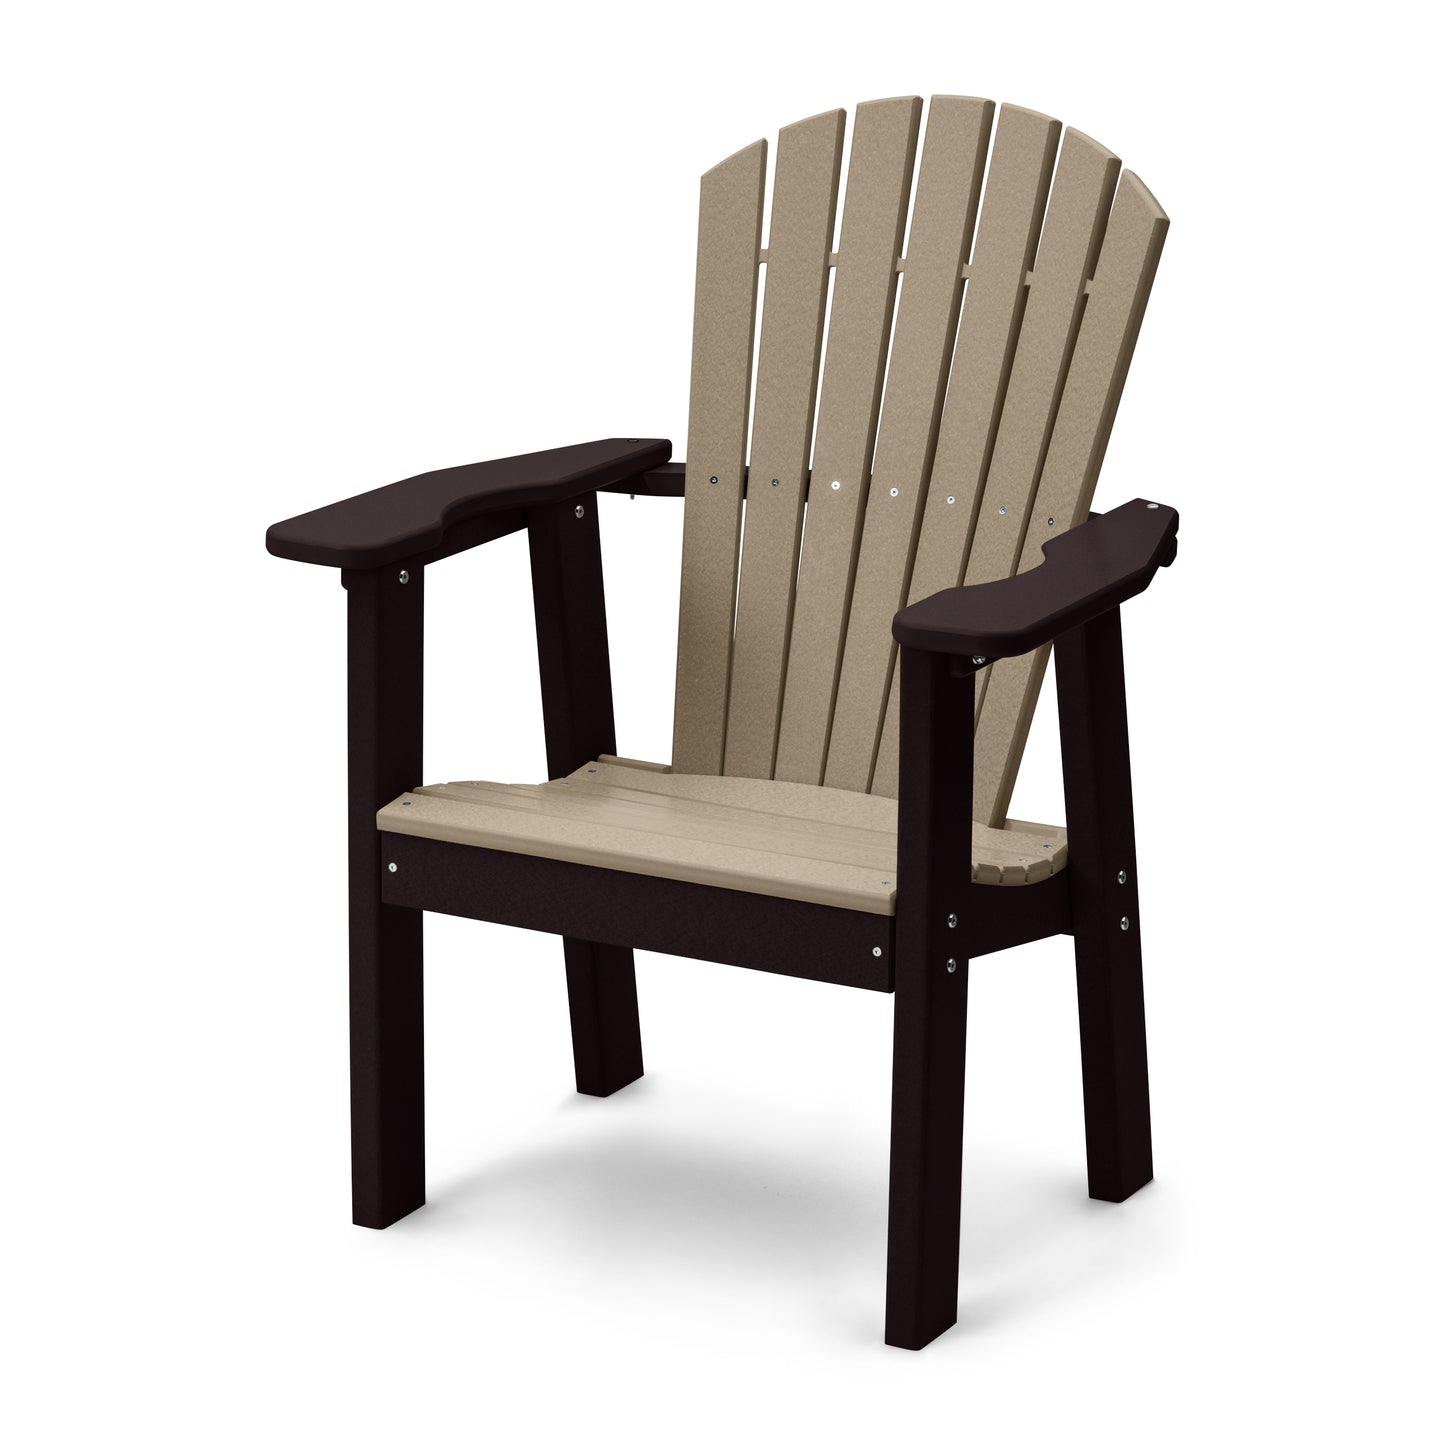 Perfect Choice Recycled Plastic Classic Upright Adirondack Chair with Elevated Seat Height - LEAD TIME TO SHIP 4 WEEKS OR LESS